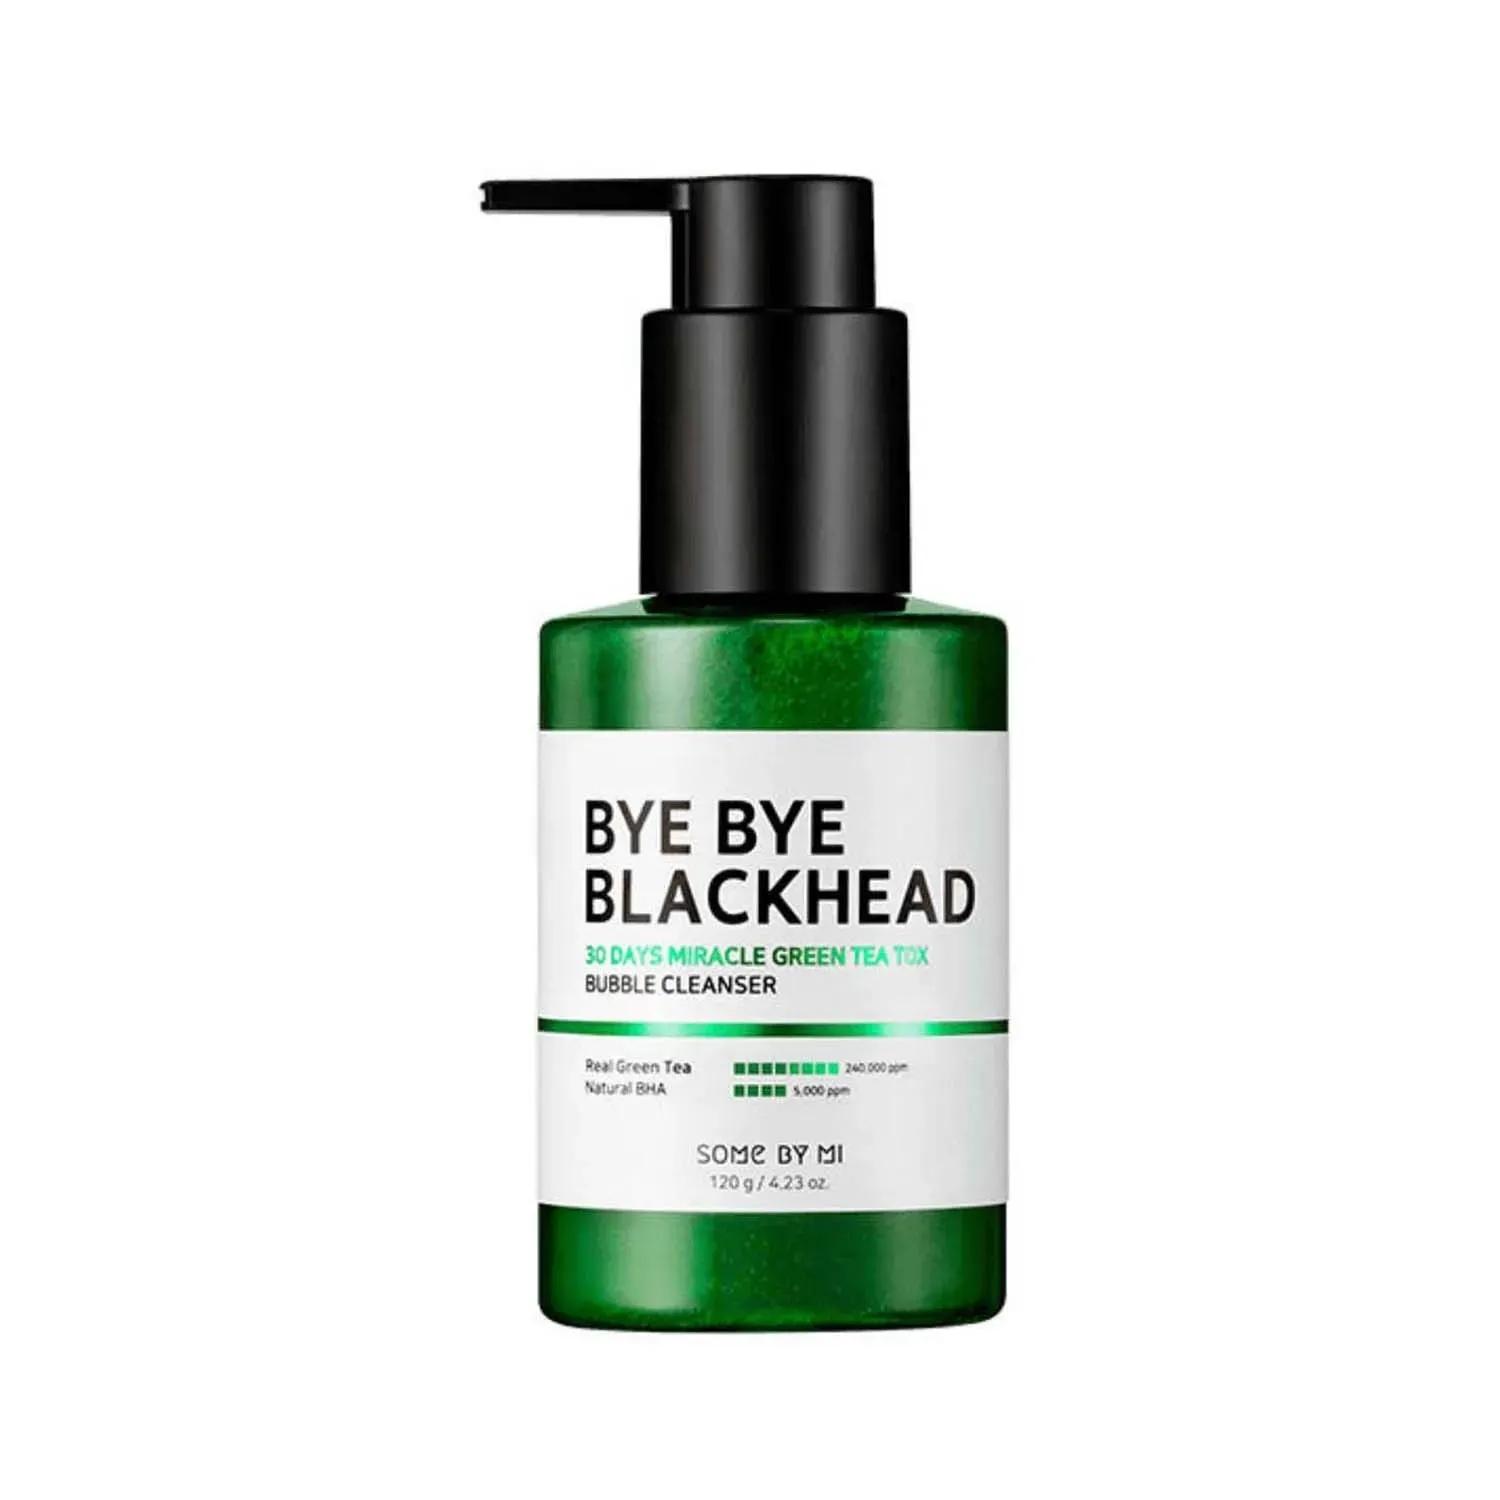 some by mi bye bye blackhead 30 days miracle green tea tox bubble cleanser - (120g)